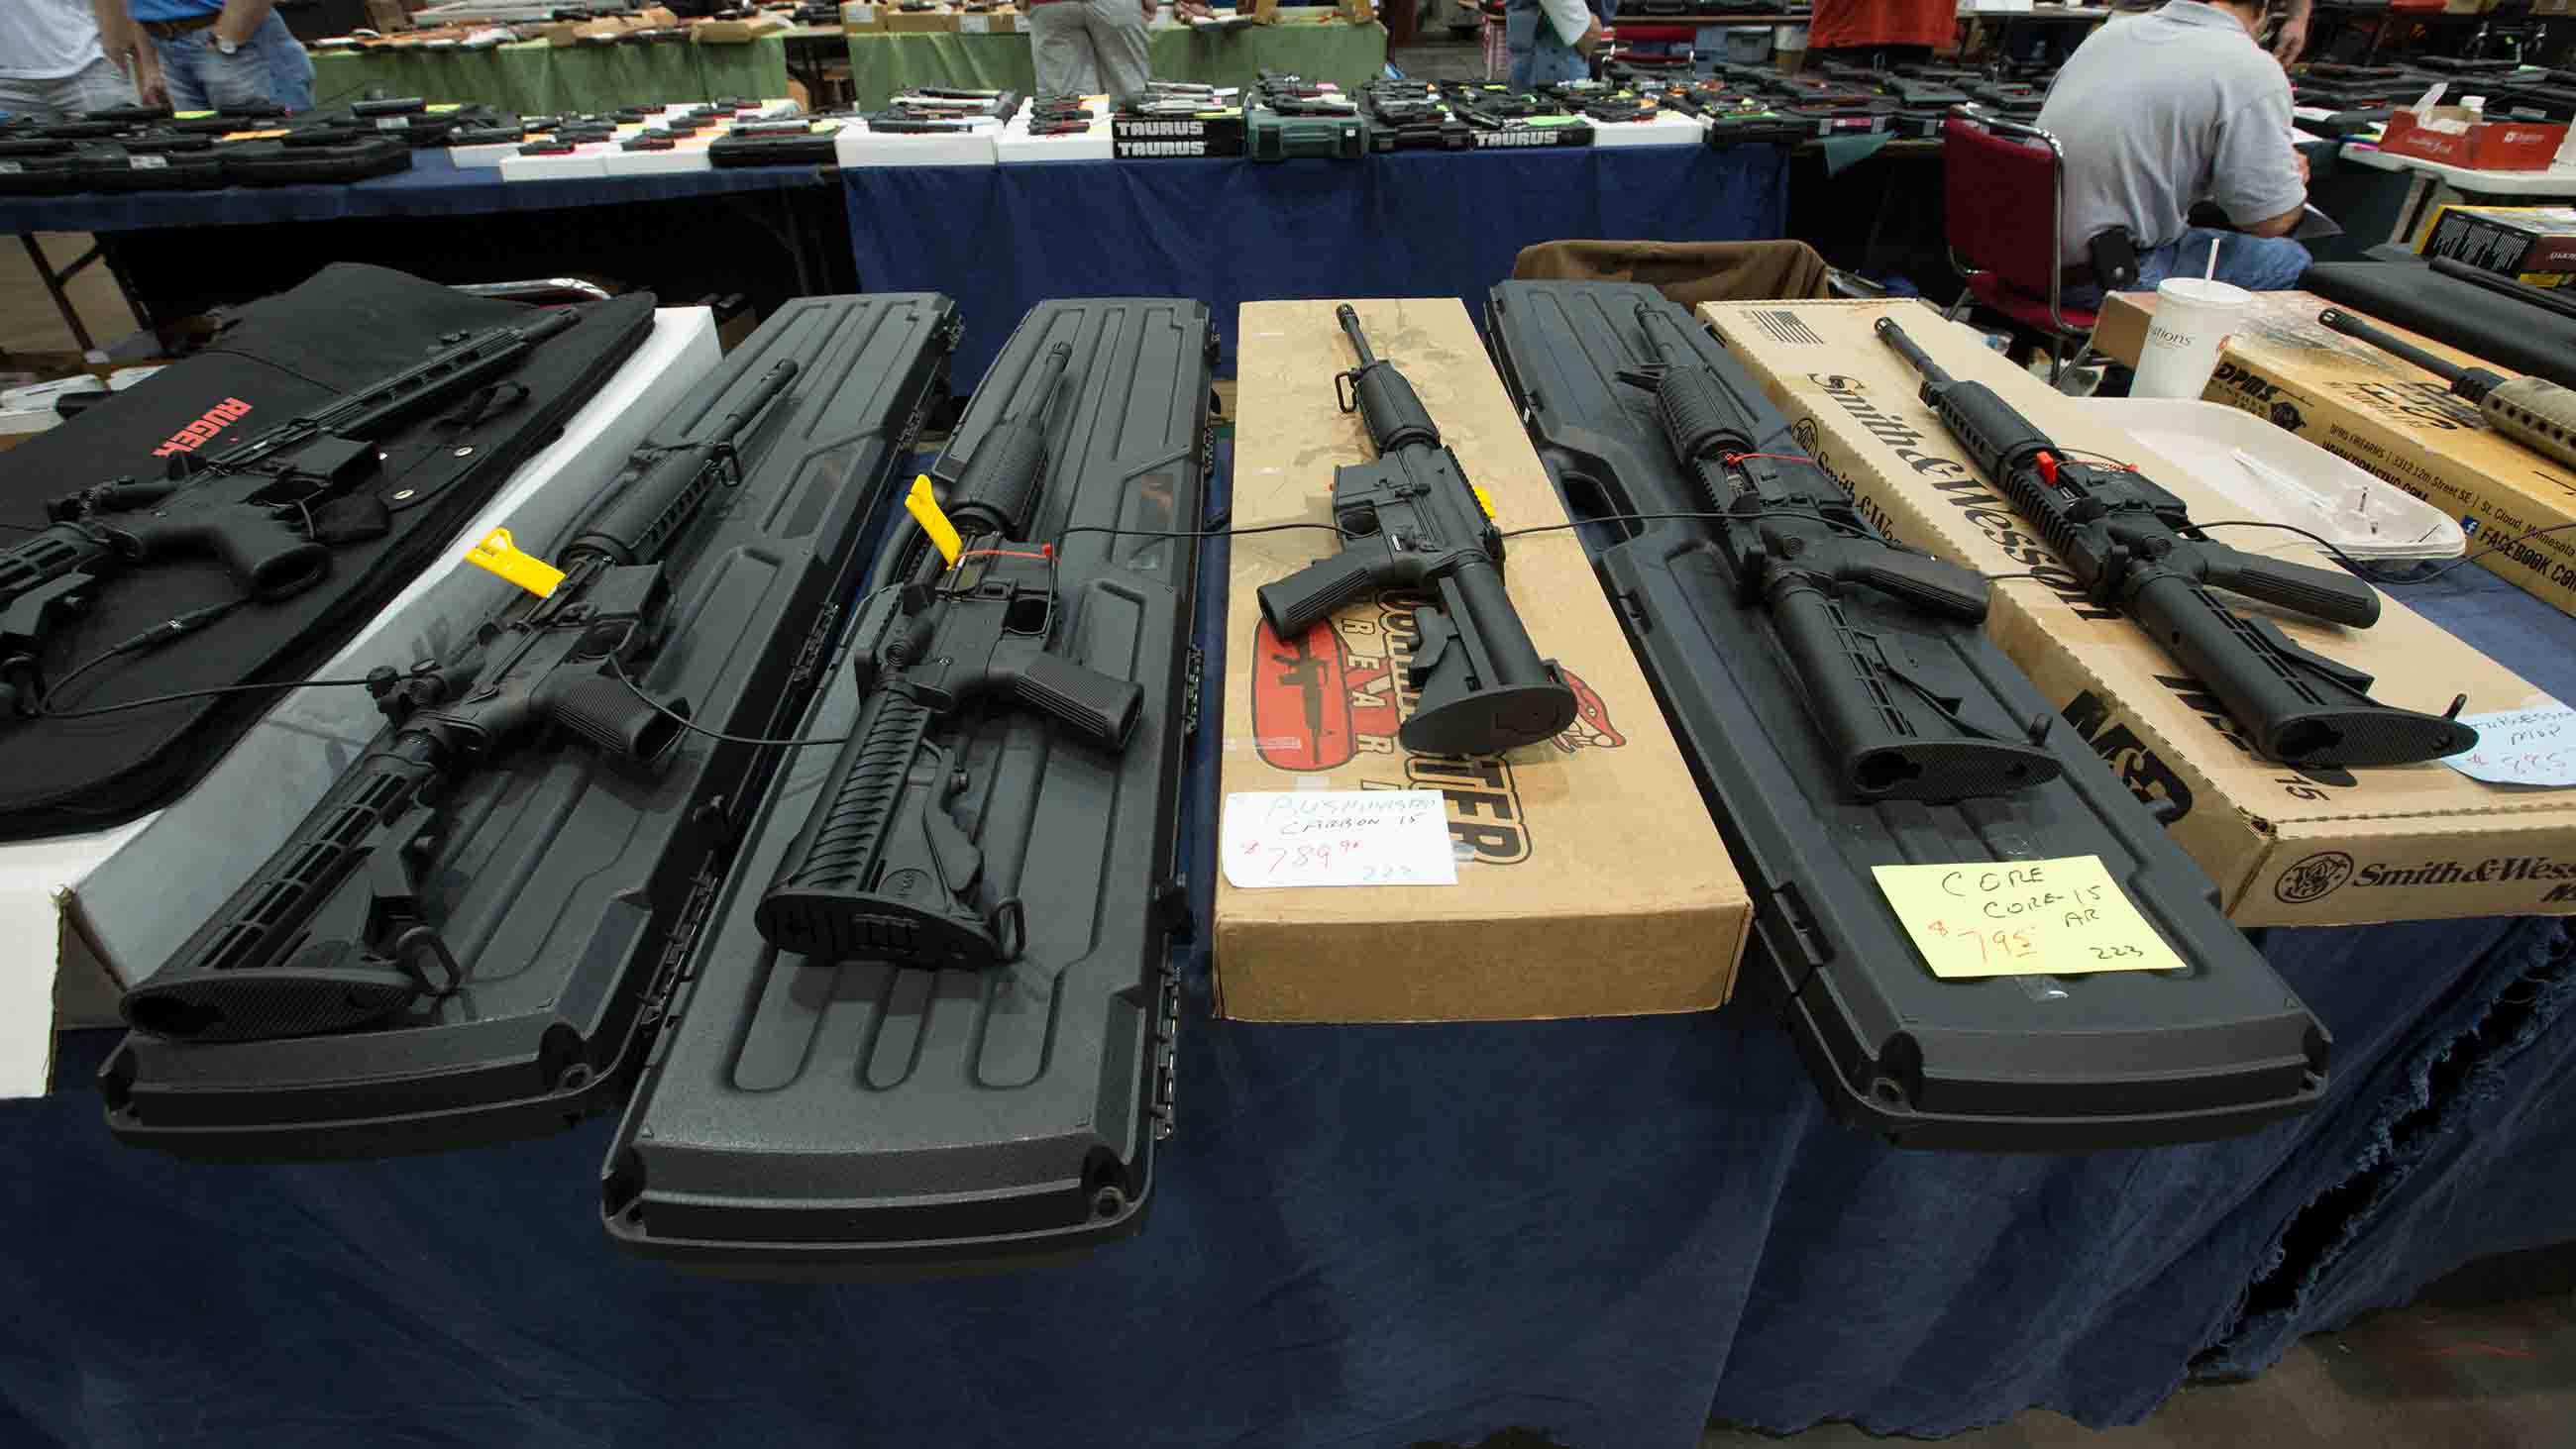 December 16th, Guns included a AR 15s , one of the types of guns found on Adam Lanza after his killing spree, and AK 47s at a gun show at the Pontchartrain Center in Kenner Louisiana held by Great Southern Gun and Knife Shows L.L. C. Gun sales have increased since the school shooting massacre in Sandy Hook Connecticut, especially AR 15s as gun owners fear new legislature will soon regulate sales of such guns. (Photo by Julie Dermansky/Corbis via Getty Images)